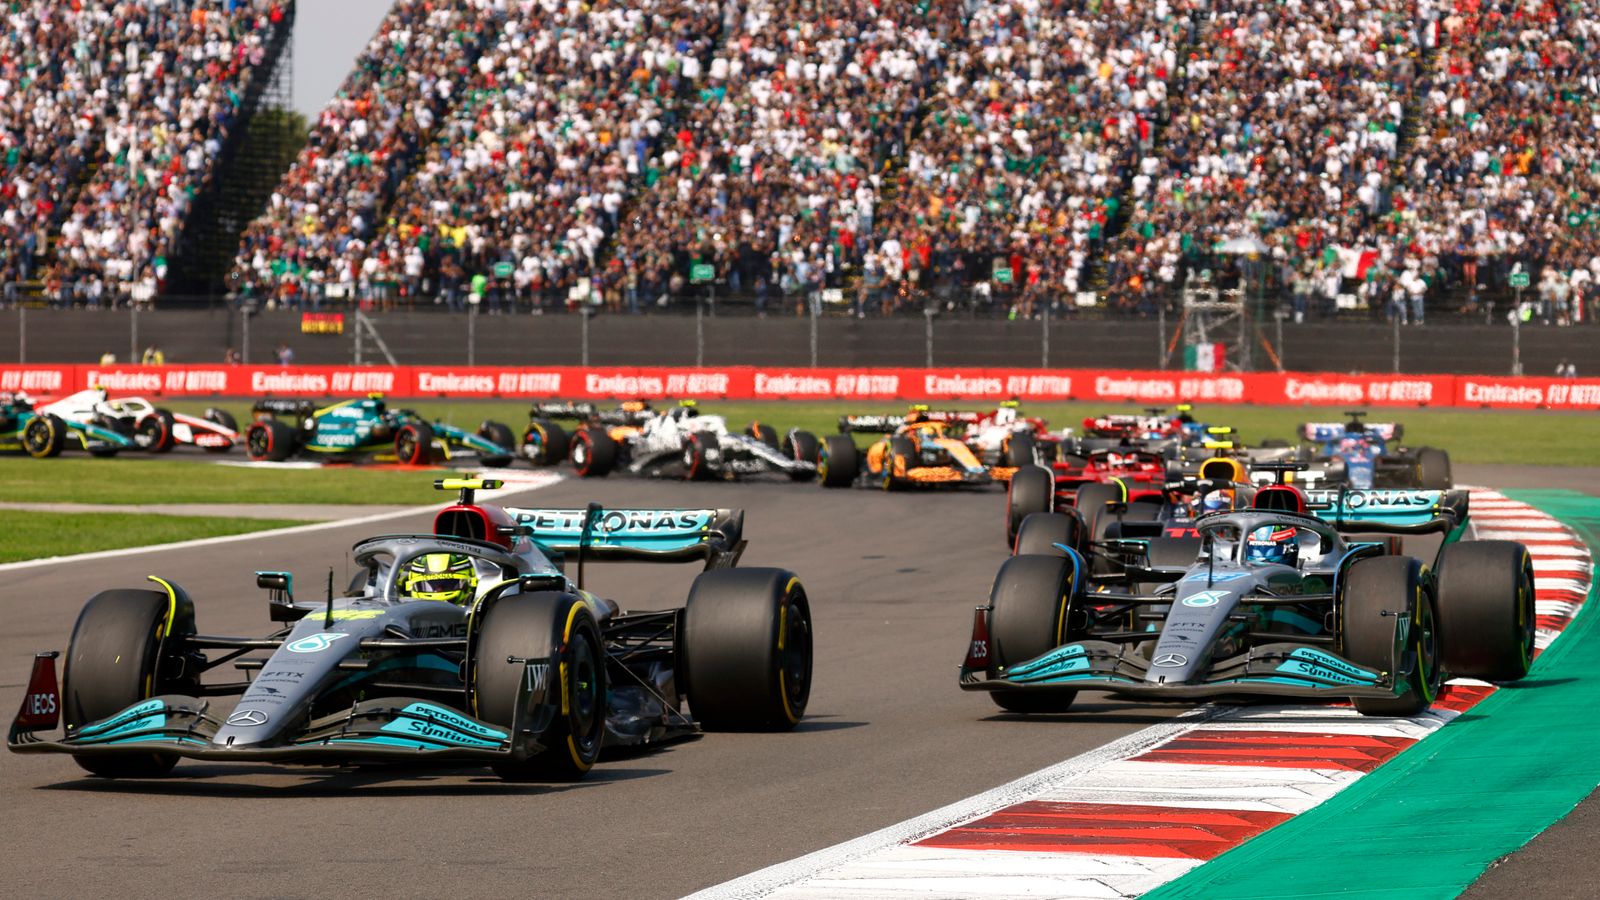 mexico-city-gp-lewis-hamilton-questions-mercedes-strategy-as-team-mate-george-russell-reflects-on-first-lap-battle